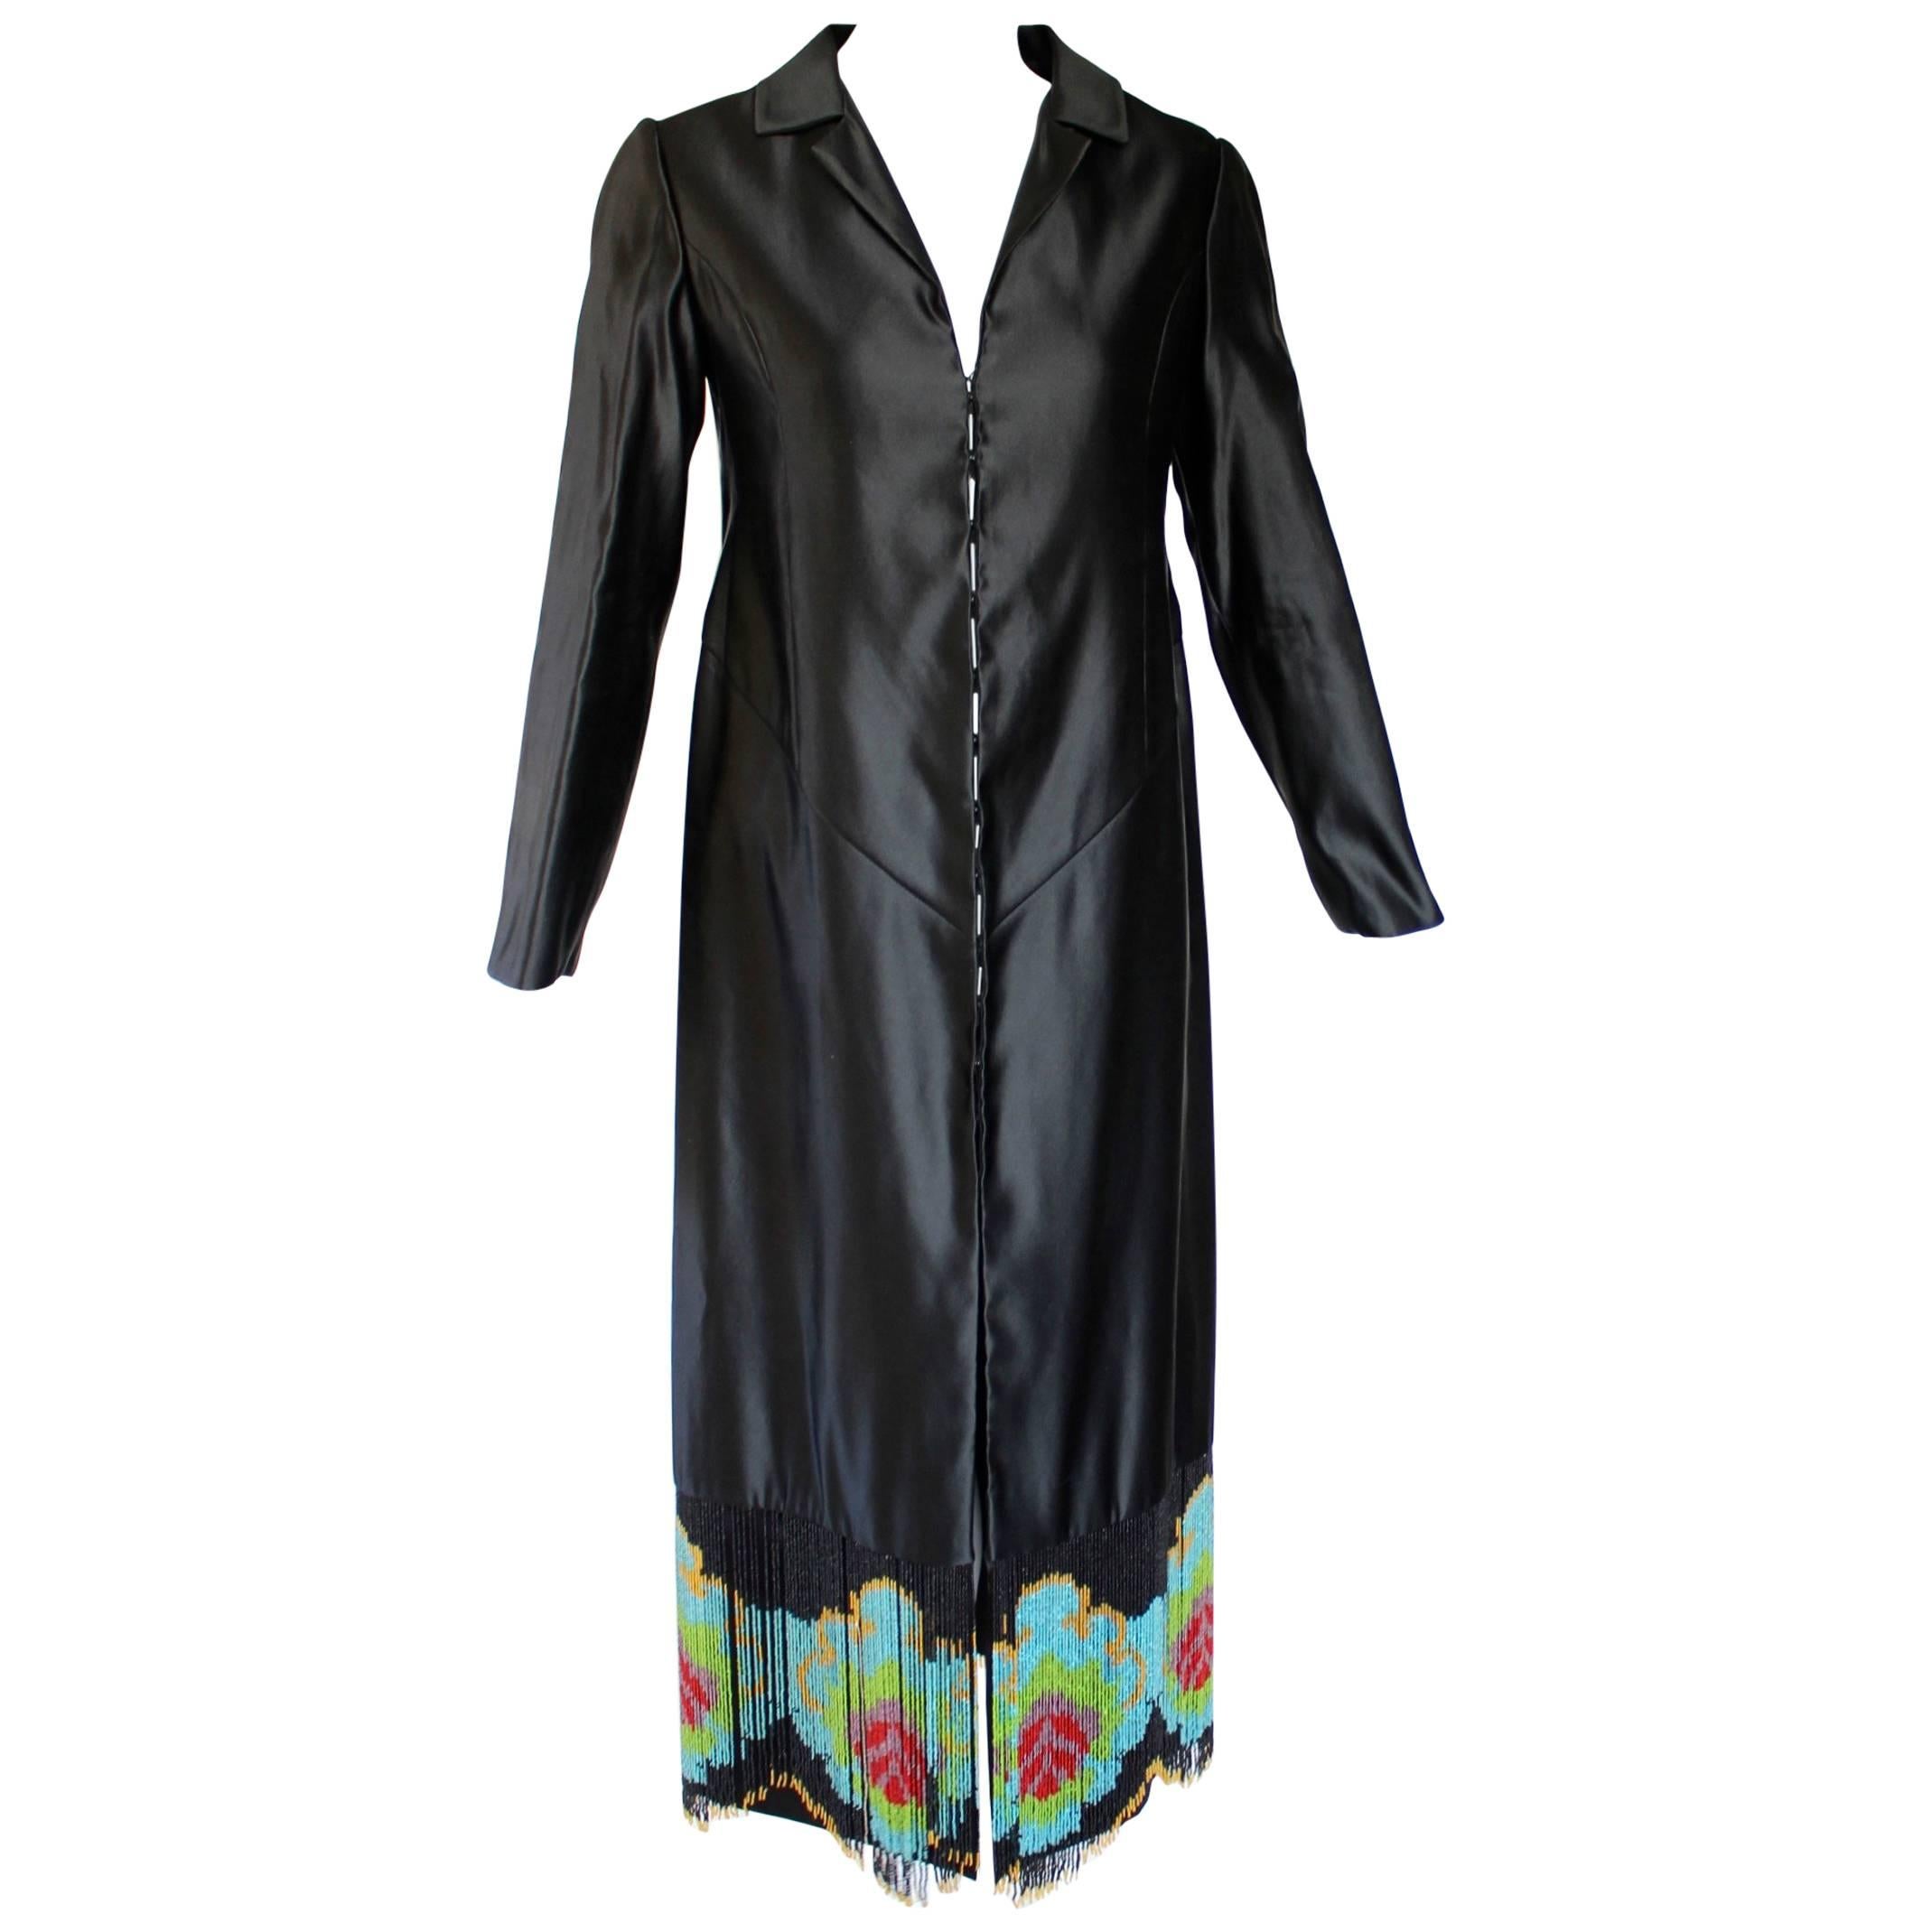 Custom Couture Black Silk Evening Dress Coat with Antique French Beaded Trim 